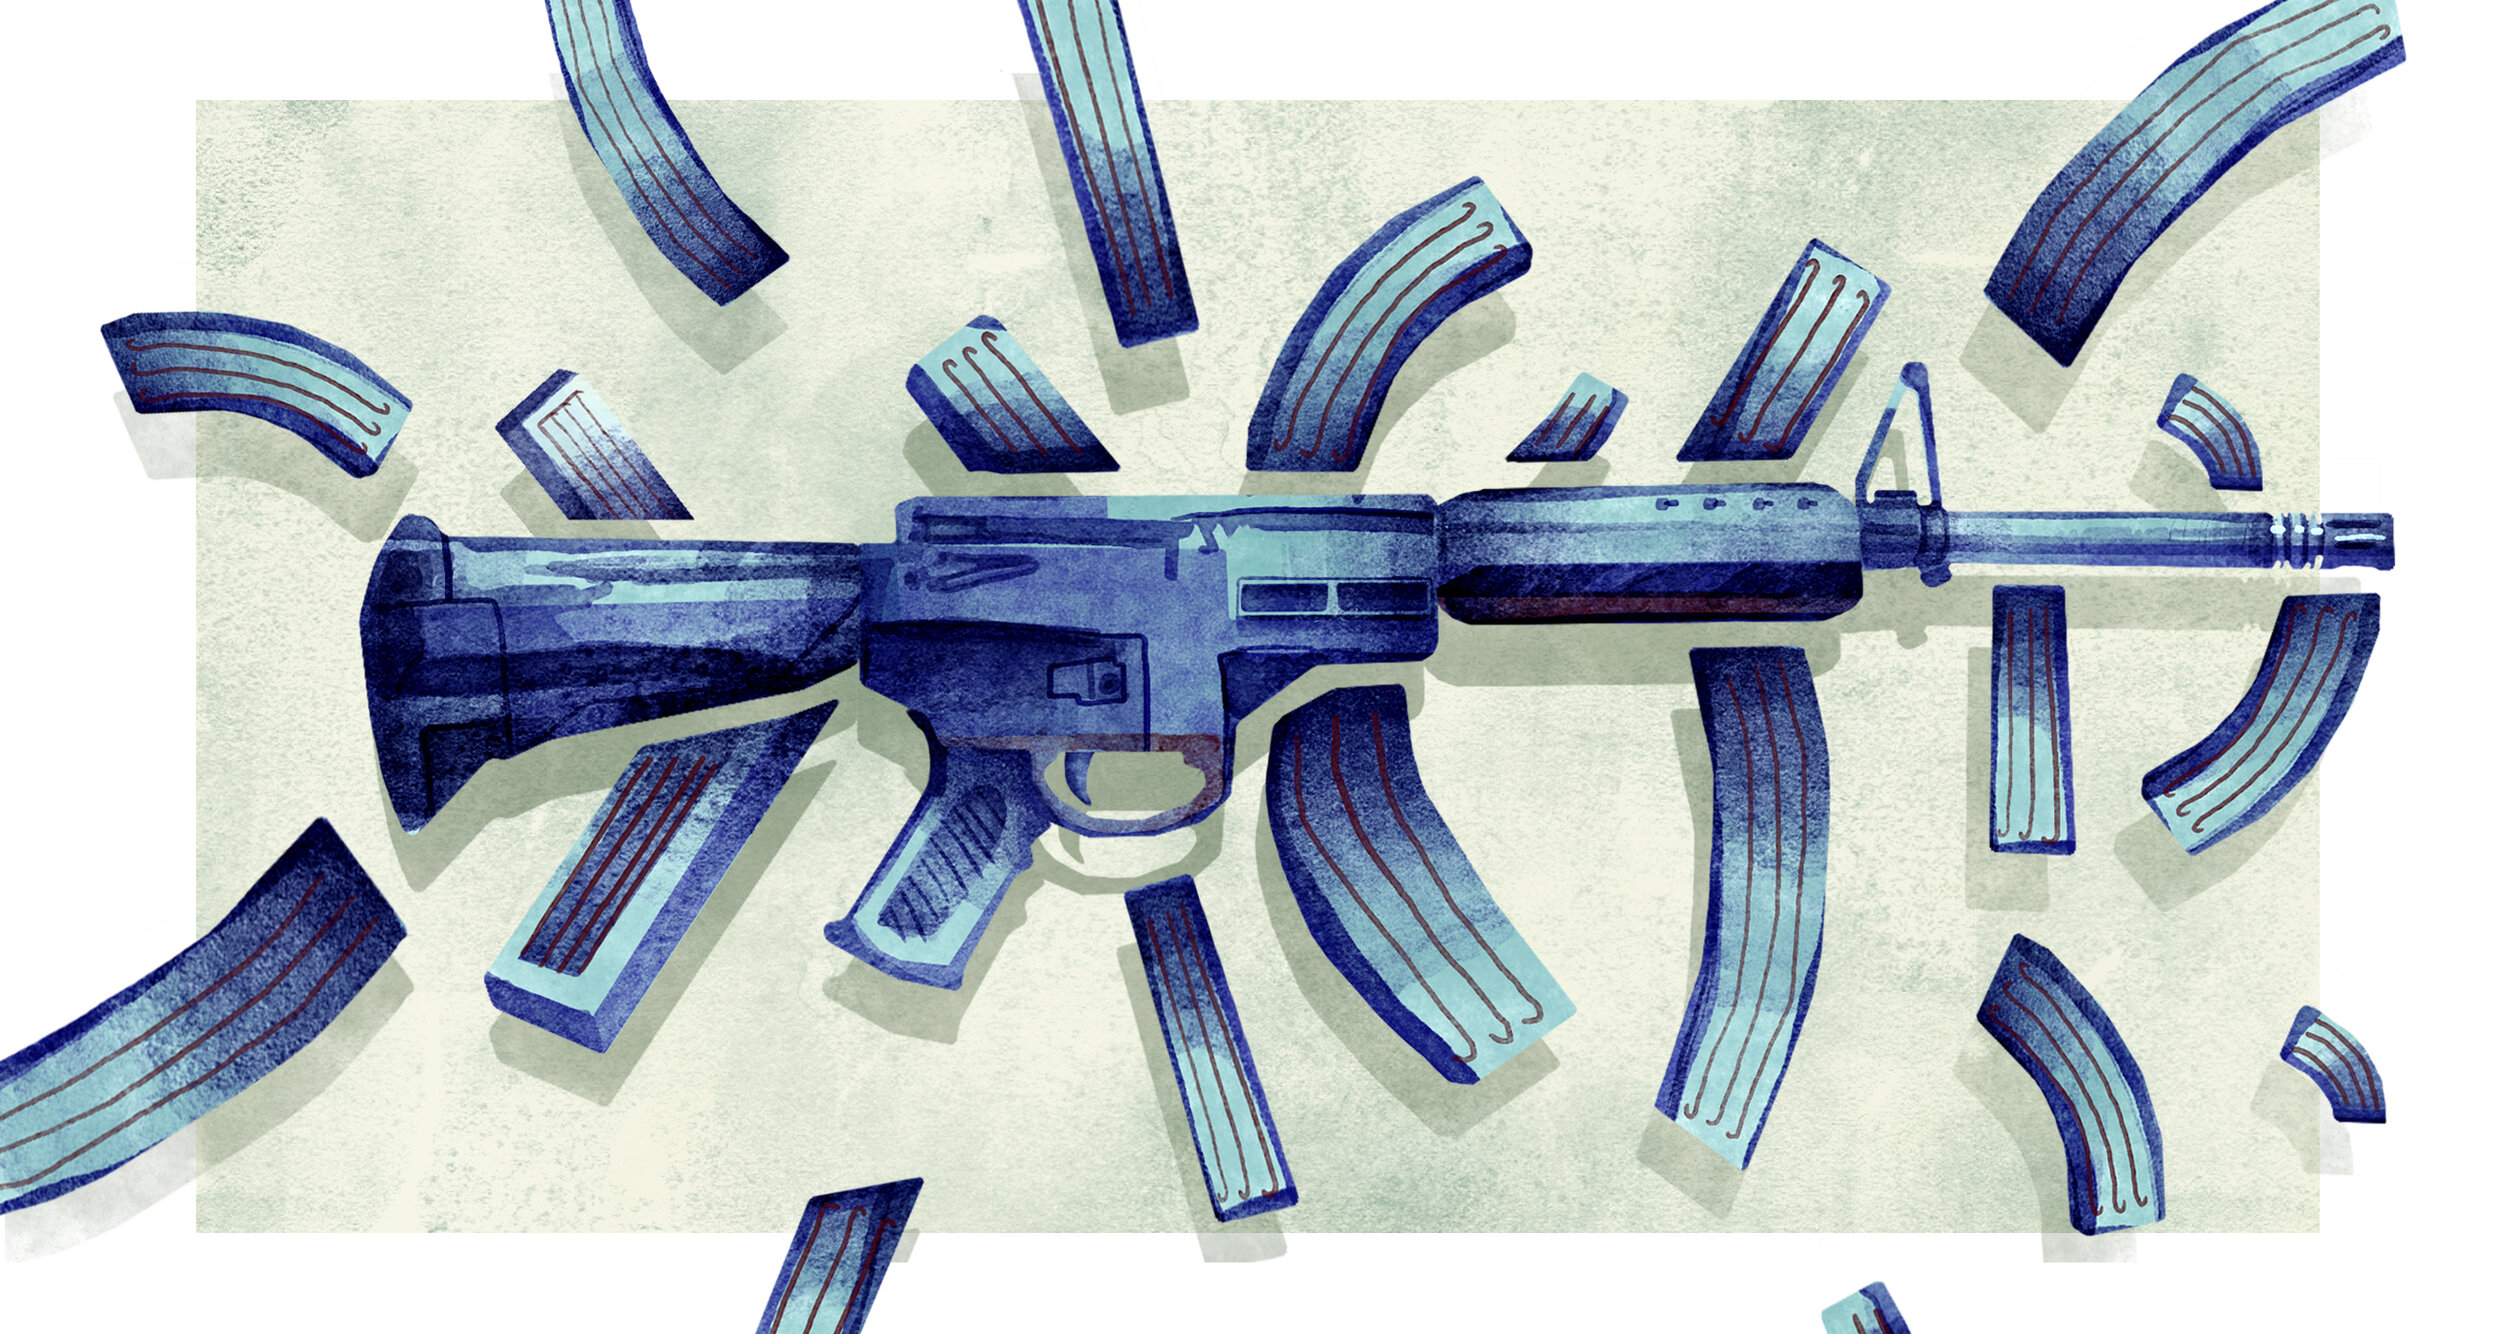  Editorial Illustration concerning the current epidemic of gun violence, and the debate surrounding gun control laws. 